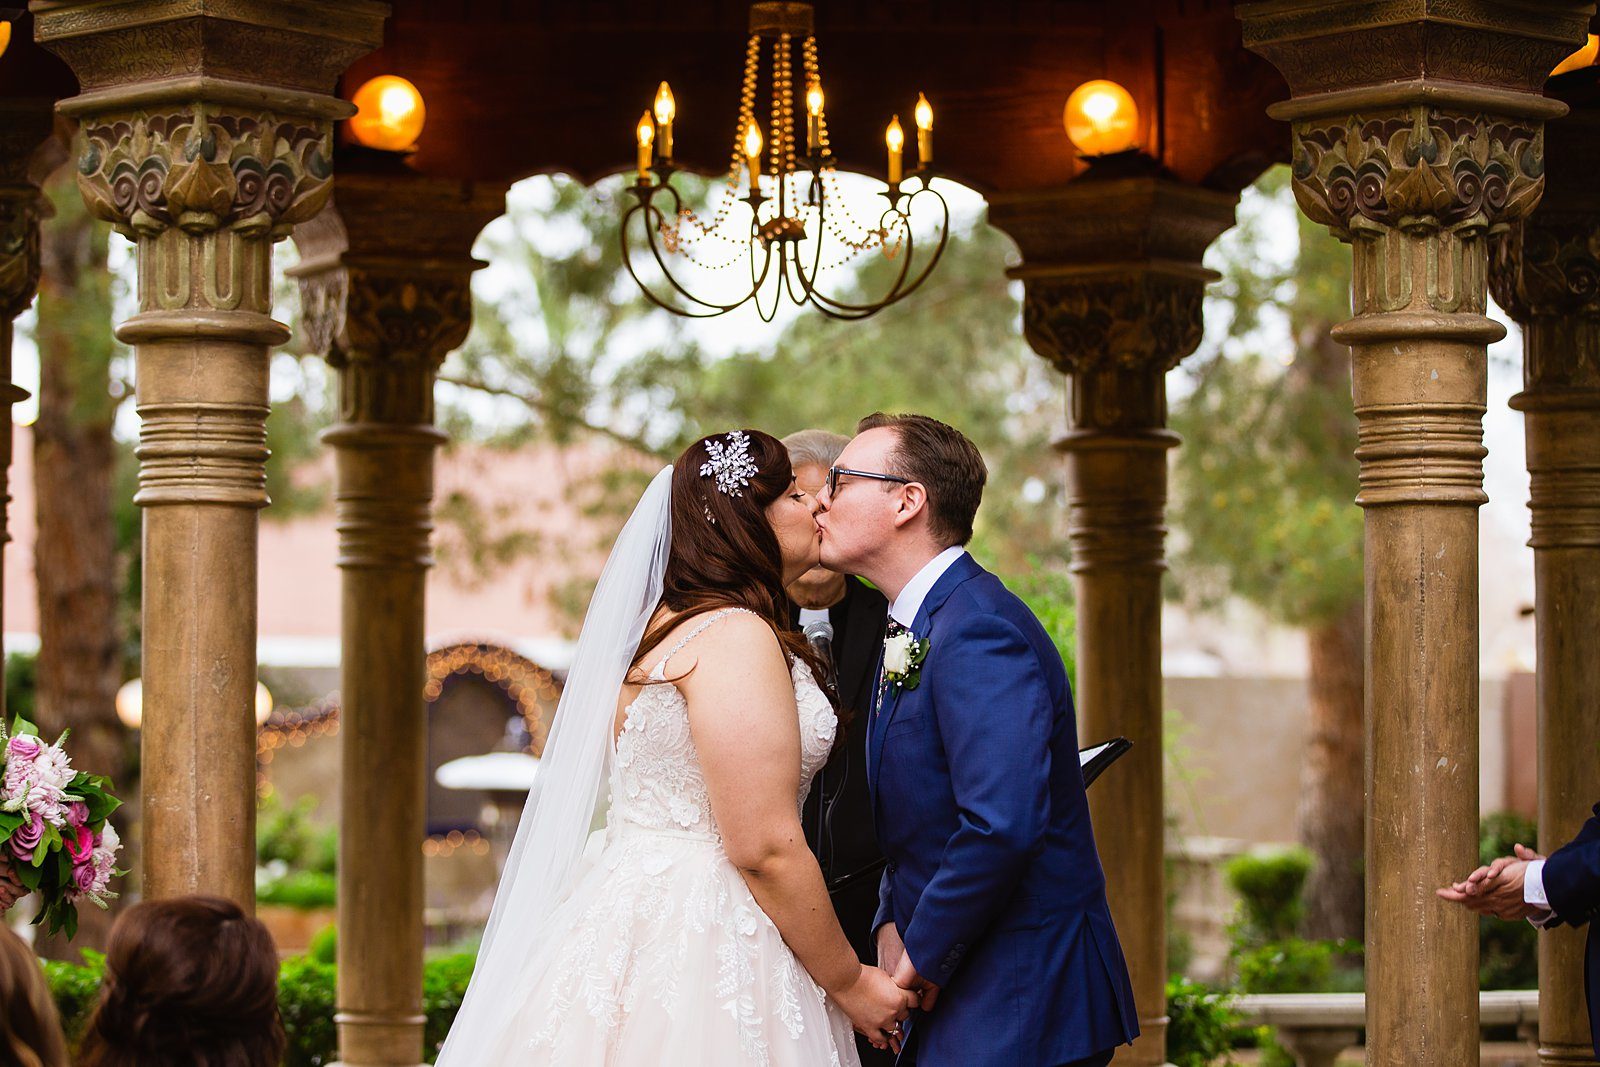 Bride and Groom share their first kiss during their wedding ceremony at The Wright House Provencal by Arizona wedding photographer PMA Photography.